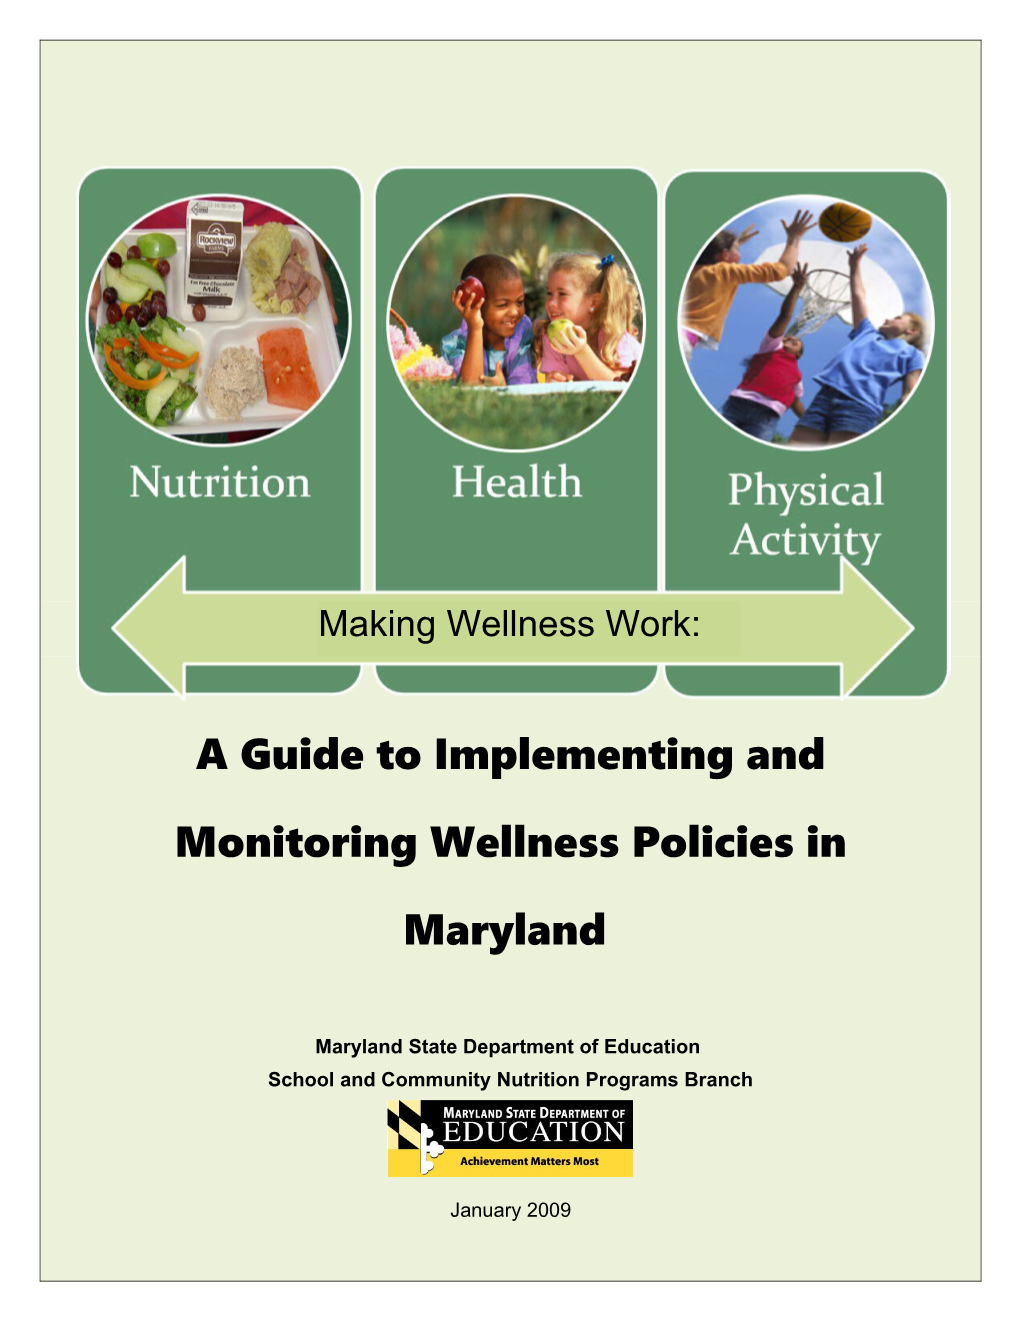 A Guide to Implementing and Monitoring Wellness Policies in Maryland